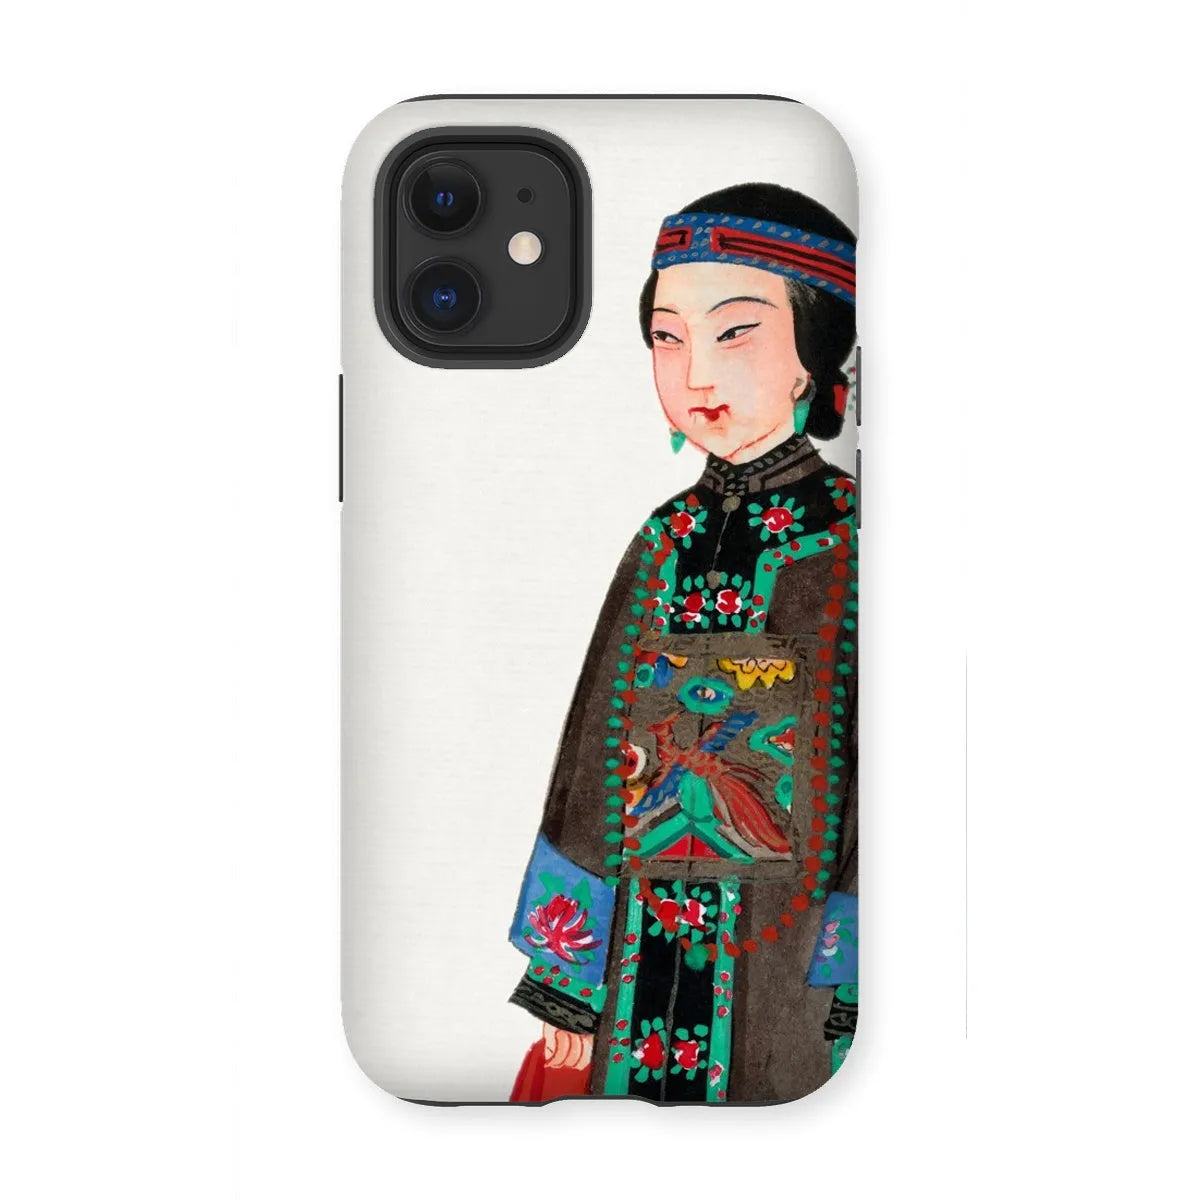 Noblewoman At Court - Chinese Aesthetic Art Phone Case - Iphone 12 Mini / Matte - Mobile Phone Cases - Aesthetic Art